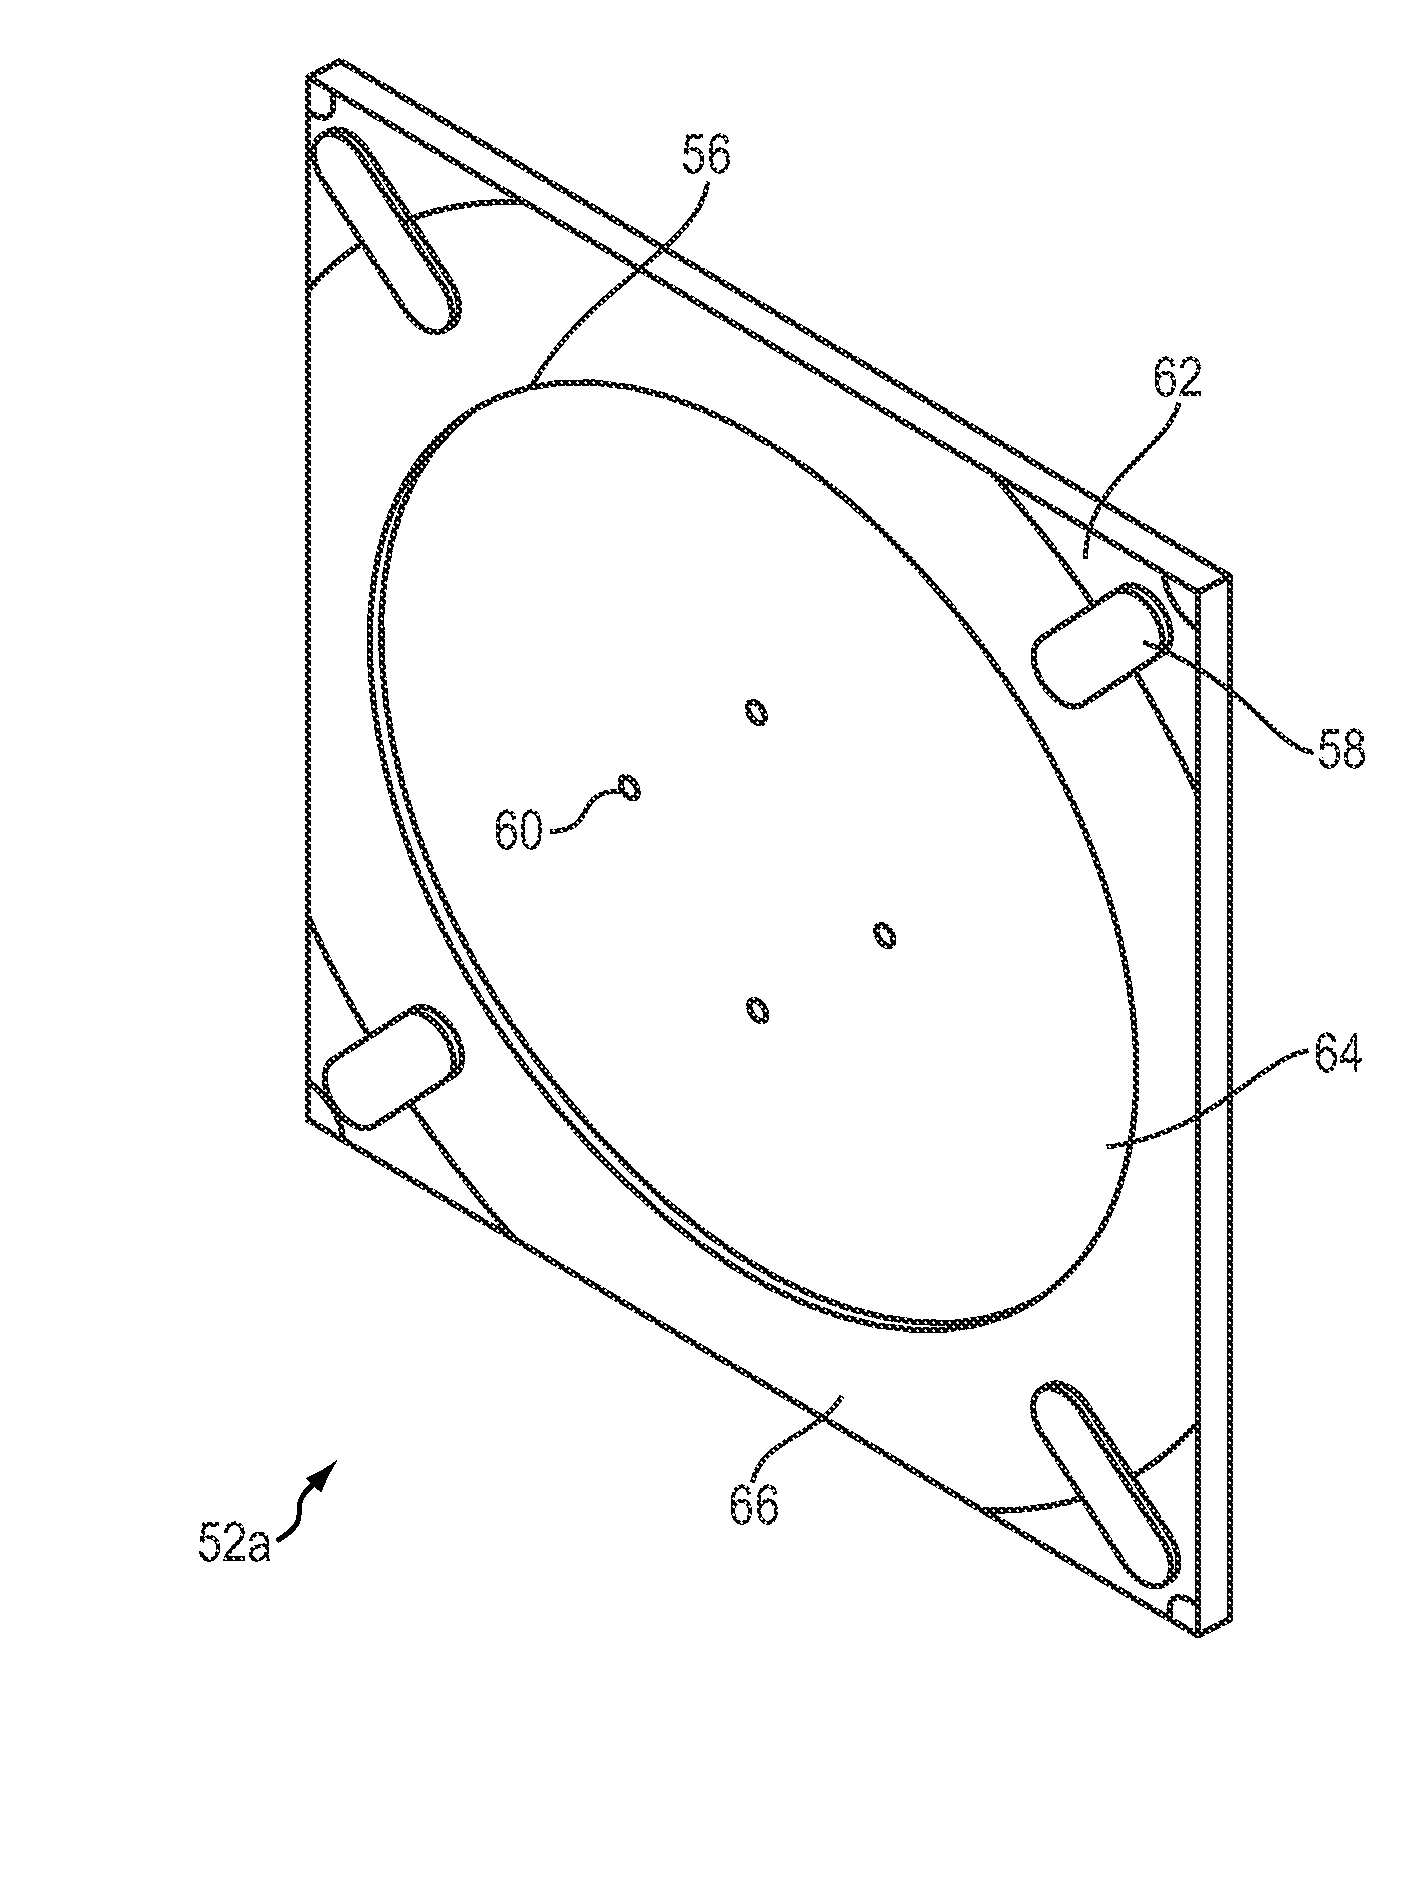 Method and Apparatus for Manufacture of Via Disk